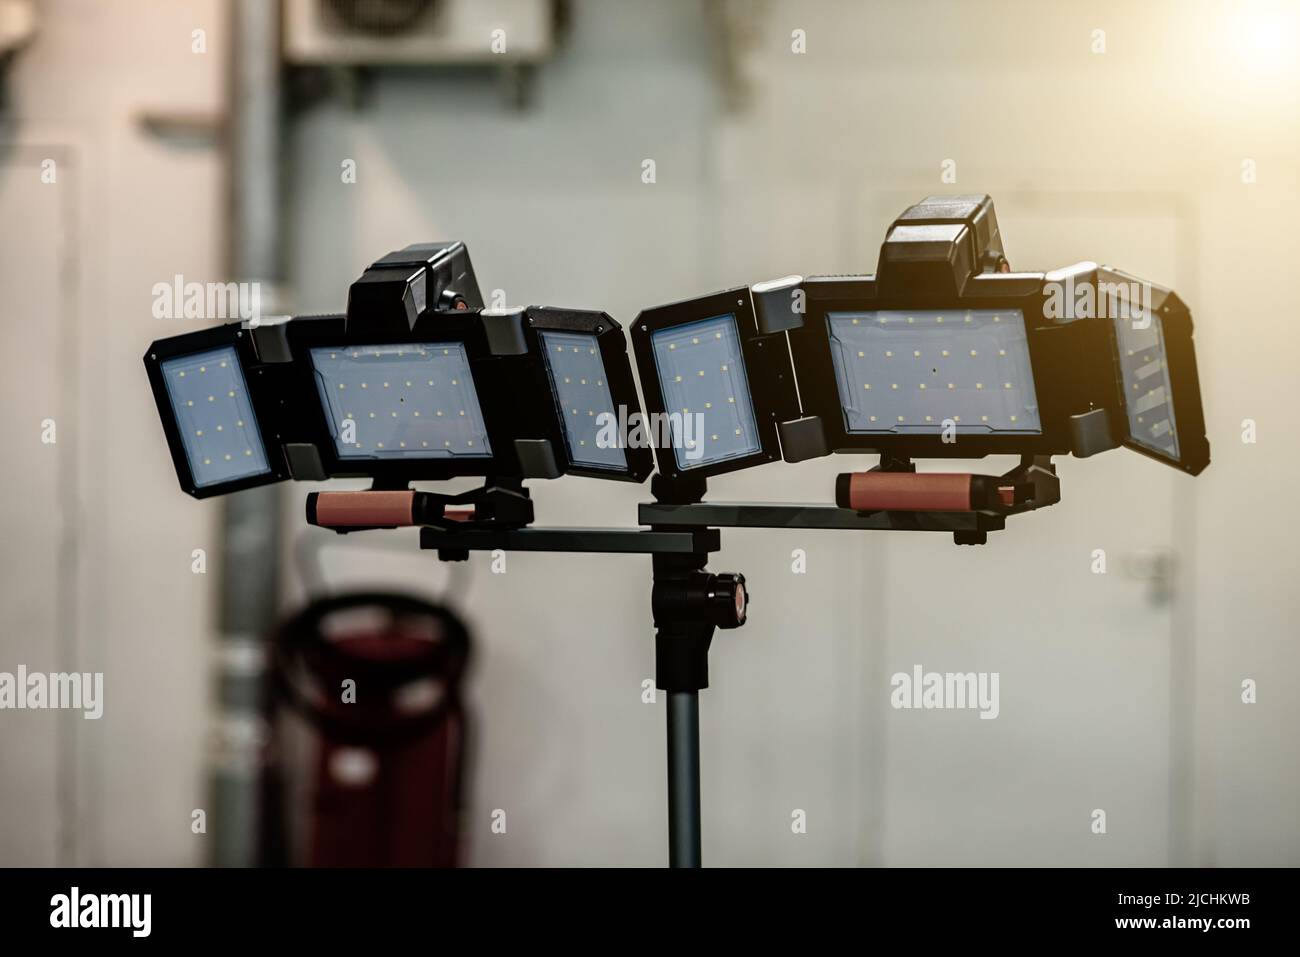 The panel led lighting with lamps on tripods. Stock Photo